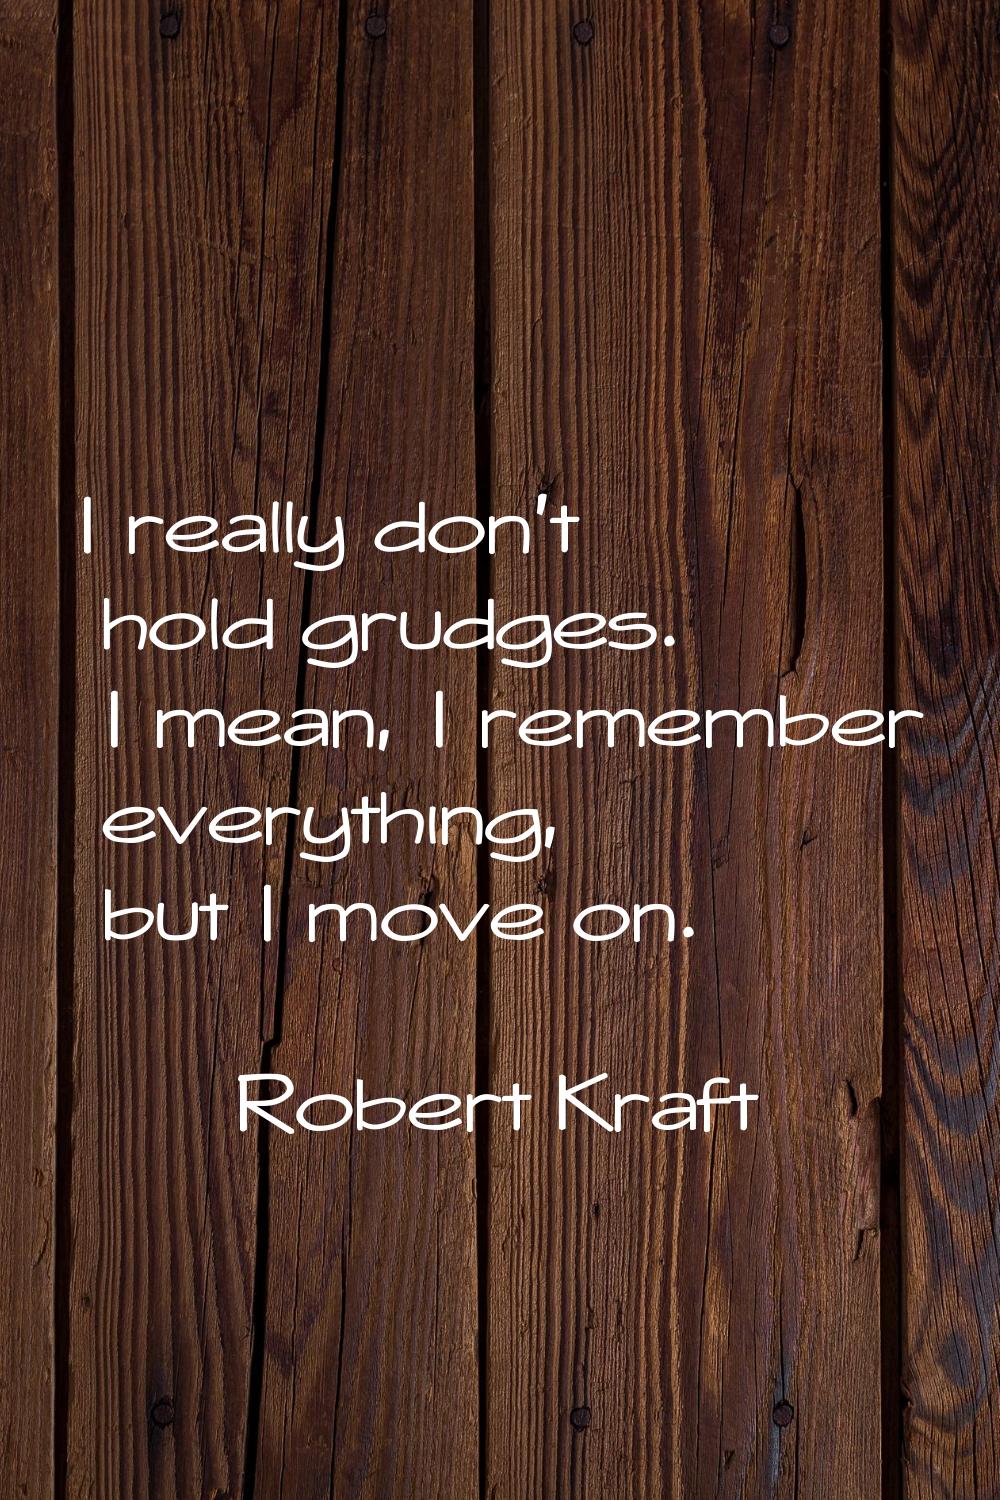 I really don't hold grudges. I mean, I remember everything, but I move on.